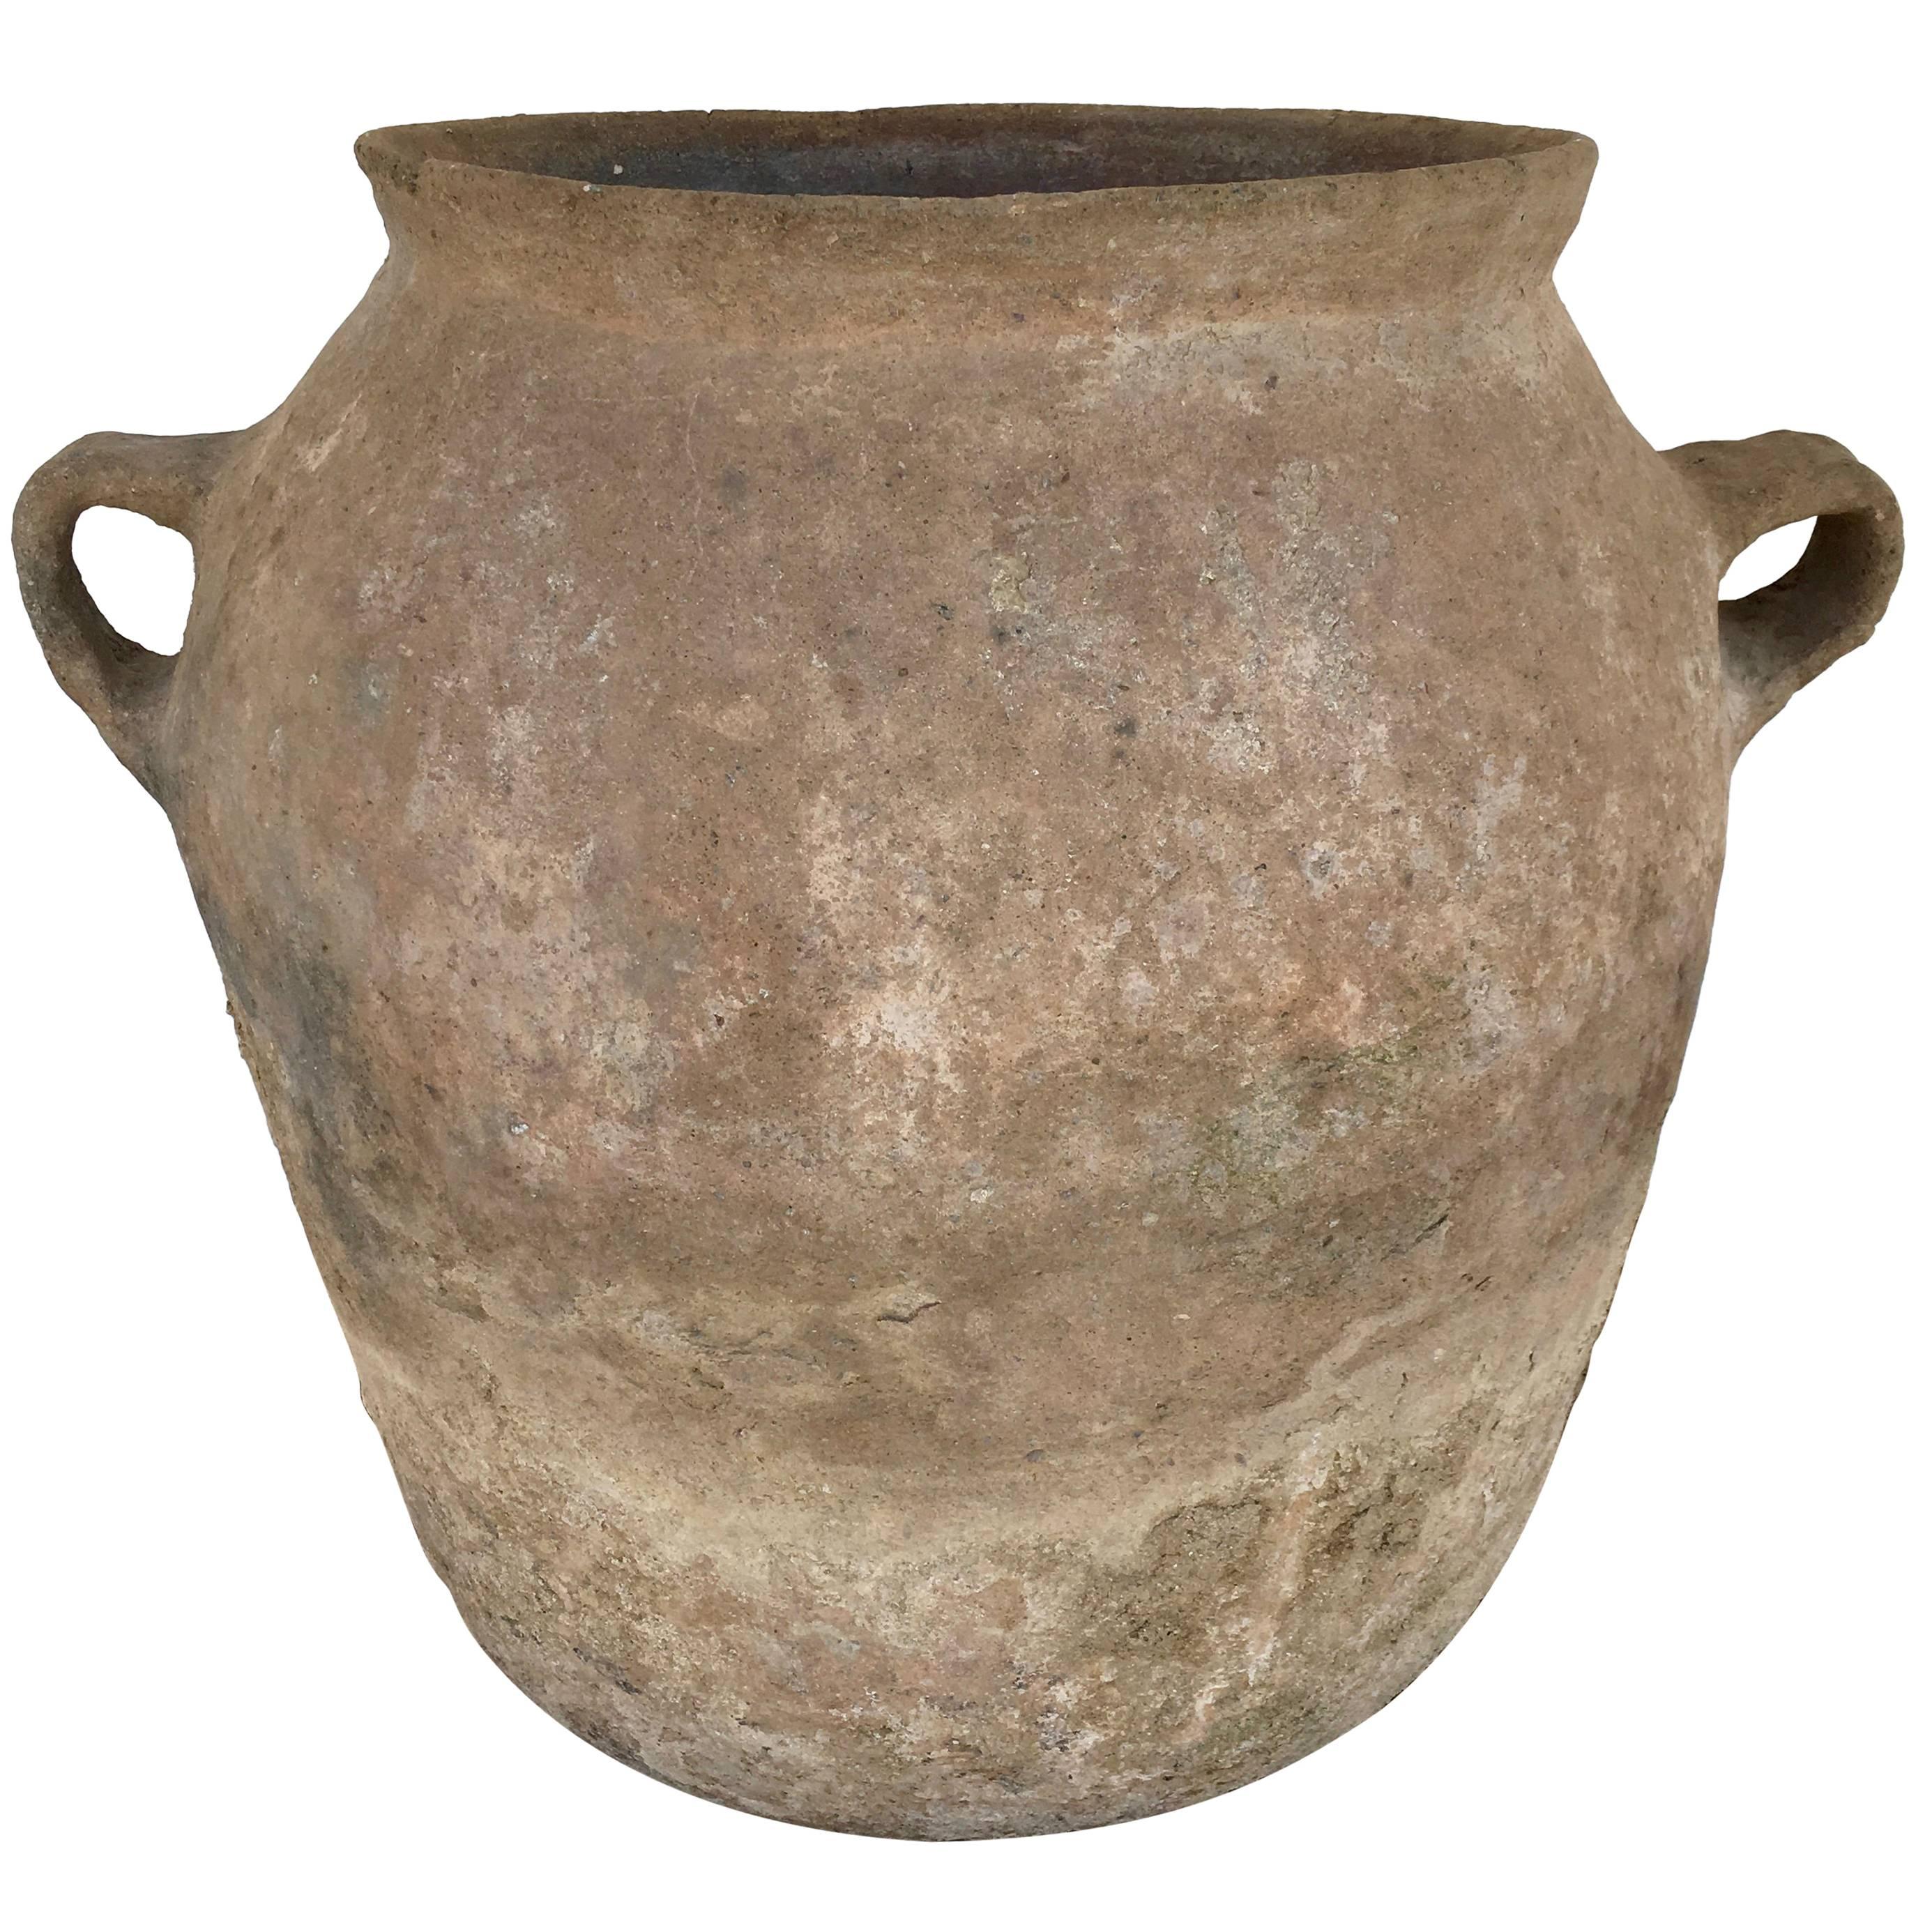 Terracotta Pot from Mexico